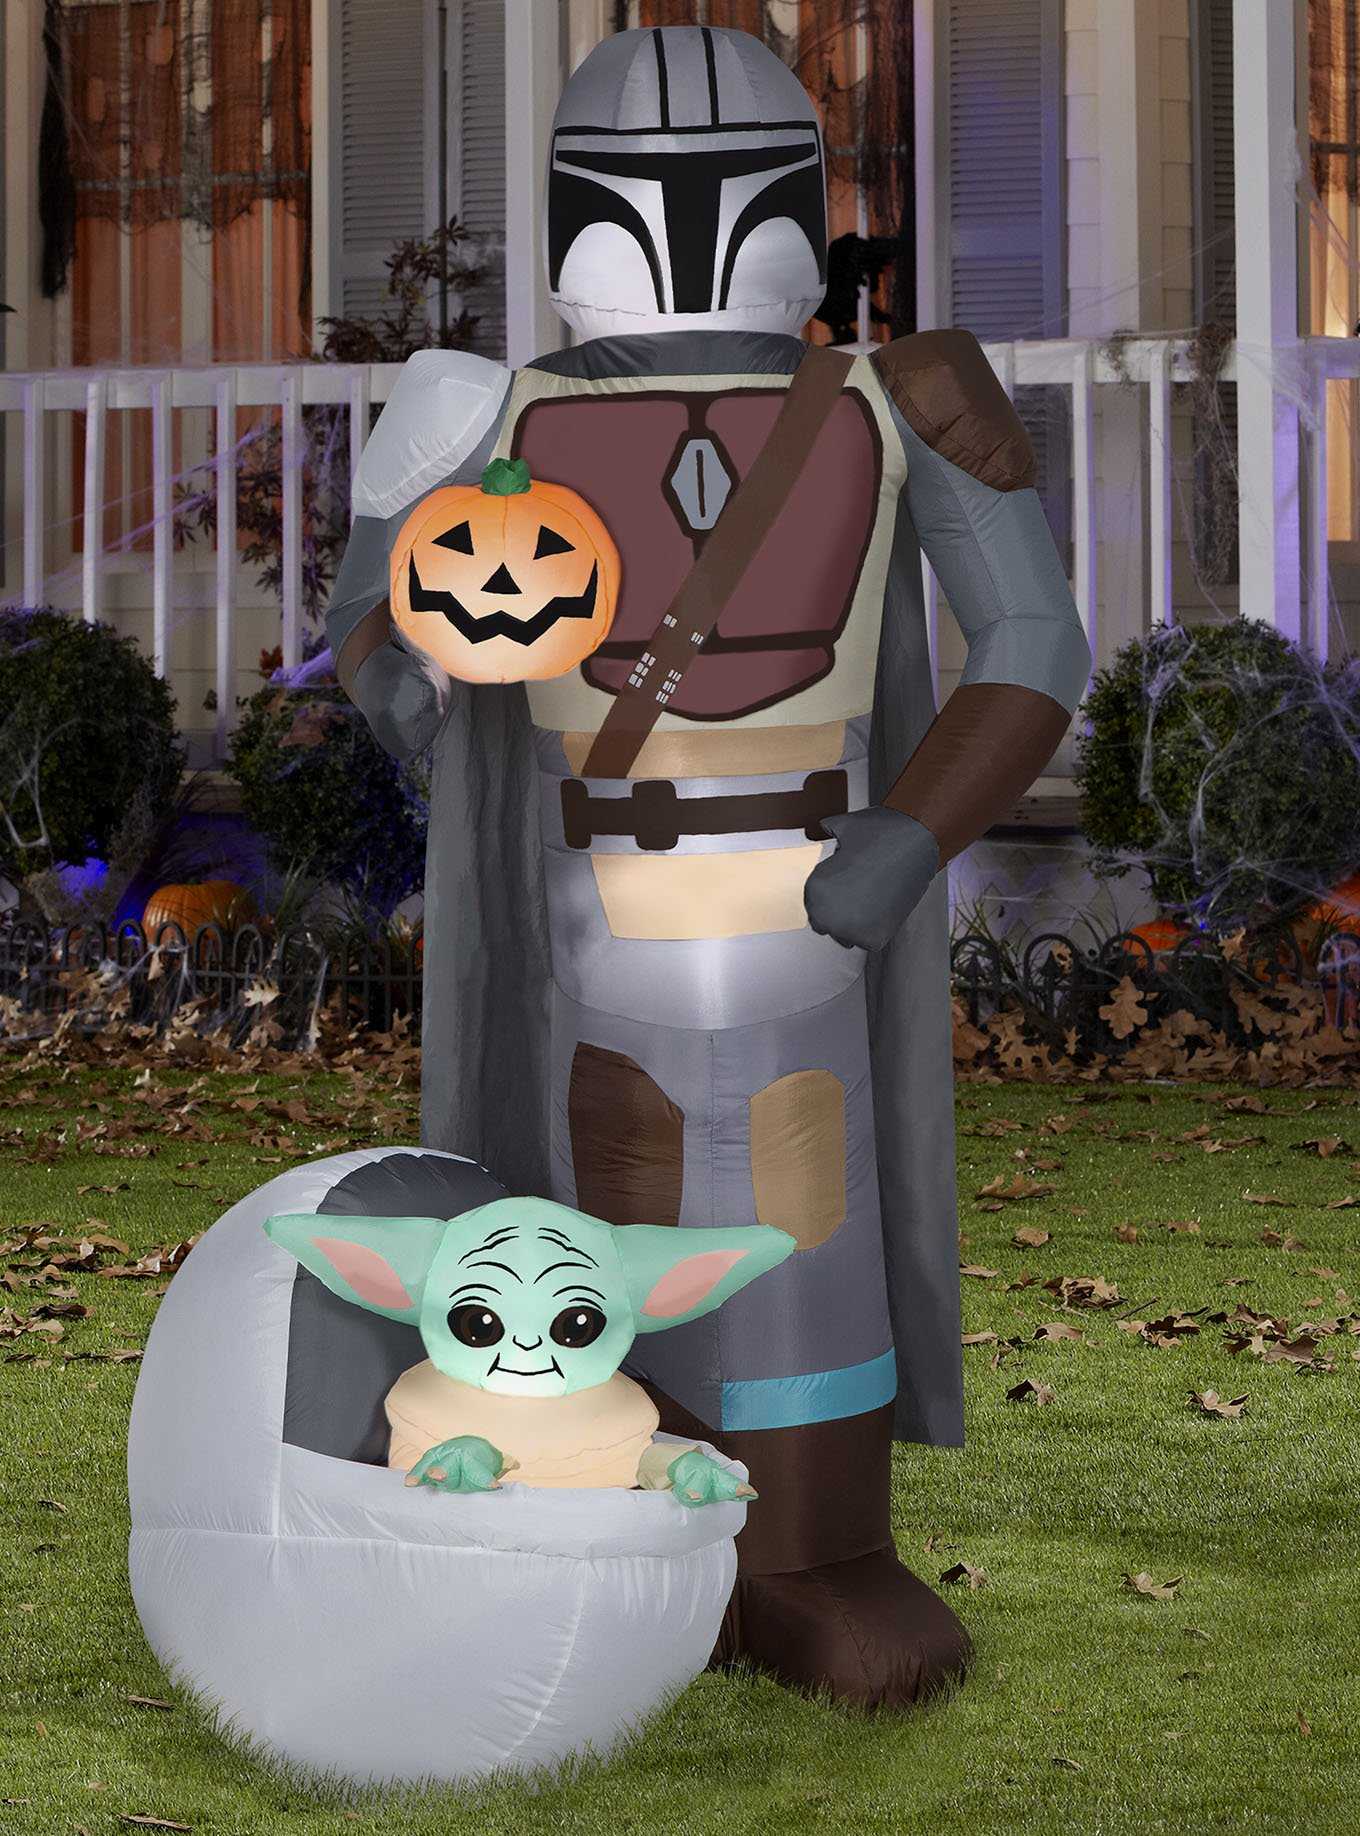 Star Wars The Mandalorian And The Child With Pumpkin Scene Airblown, , hi-res